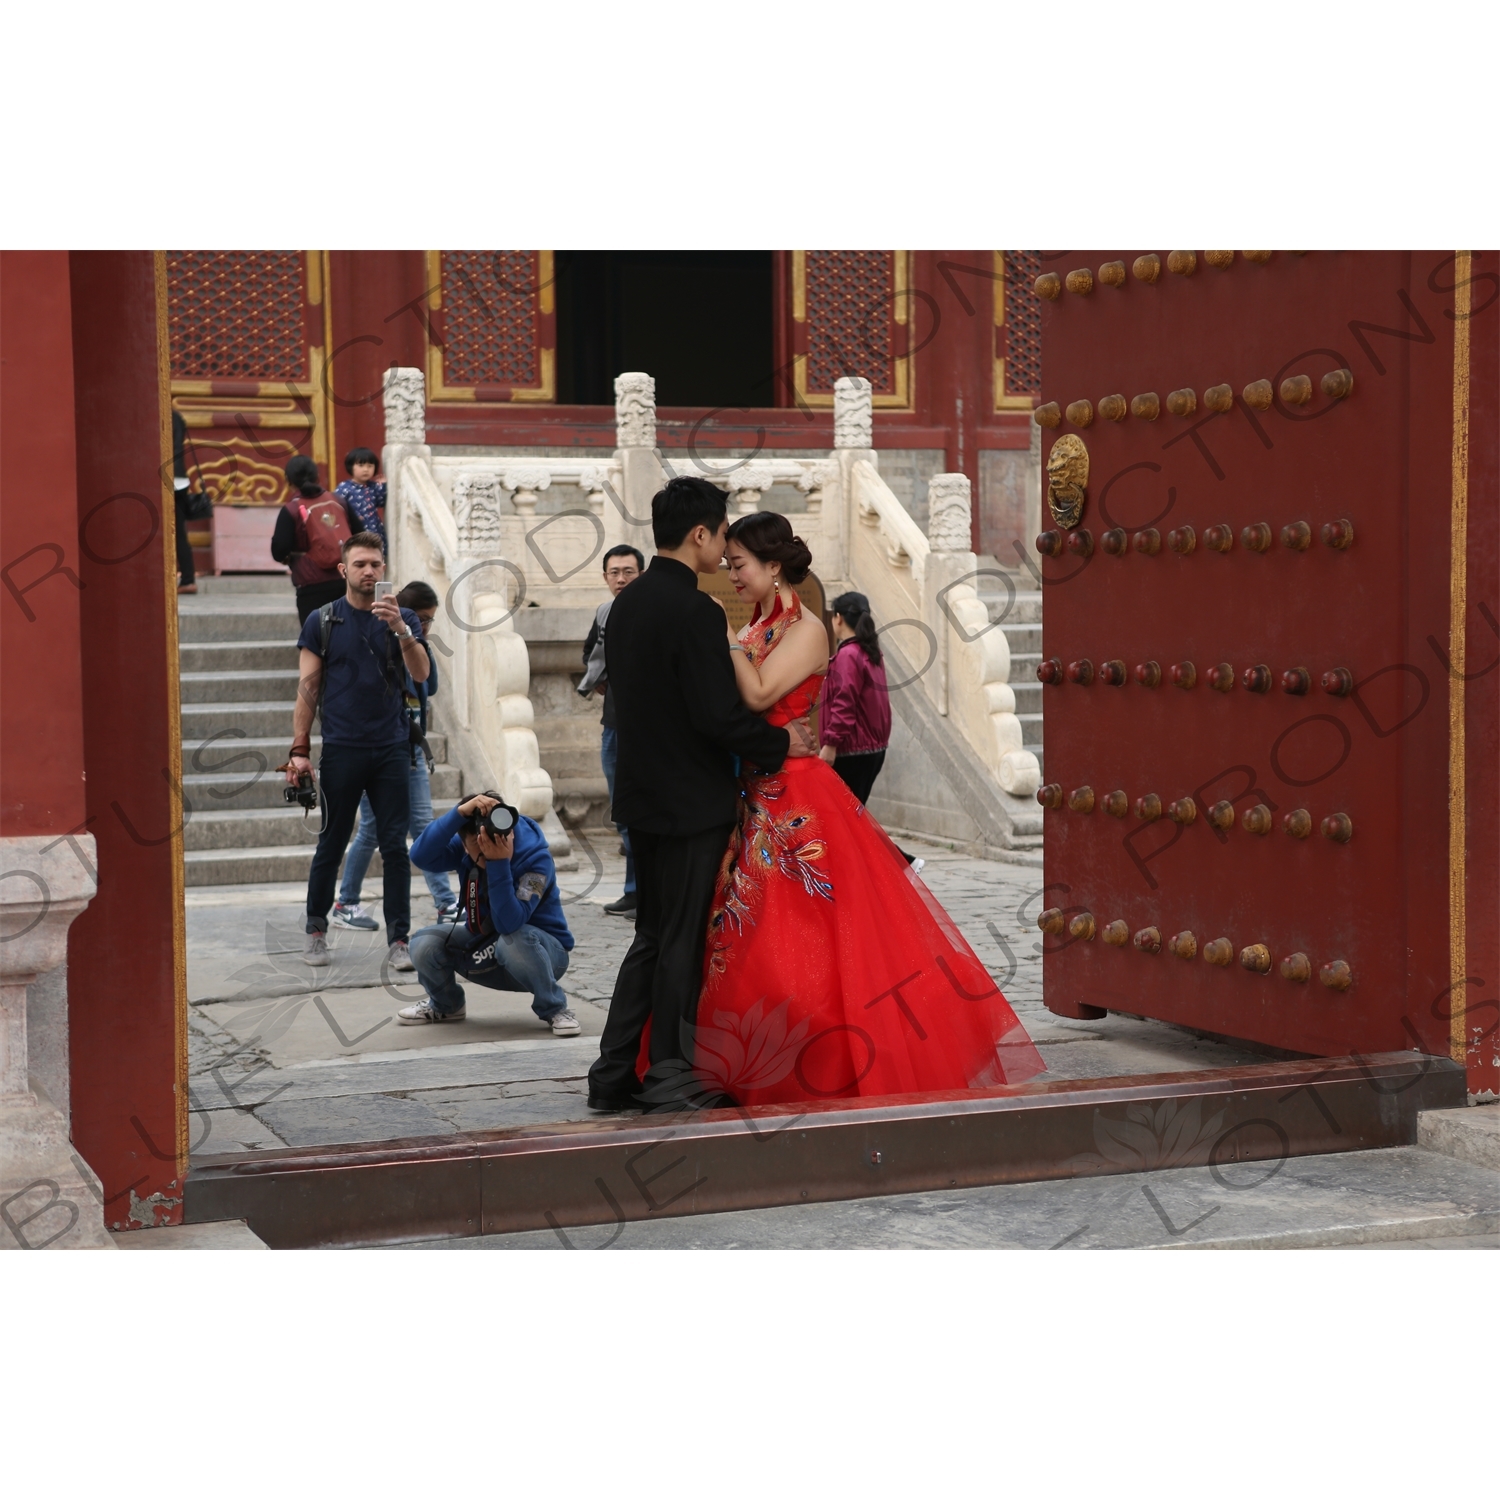 Married Couple Getting Their Picture Taken in the Hall of Prayer for Good Harvests (Qi Nian Dian) Compound in the Temple of Heaven (Tiantan) in Beijing